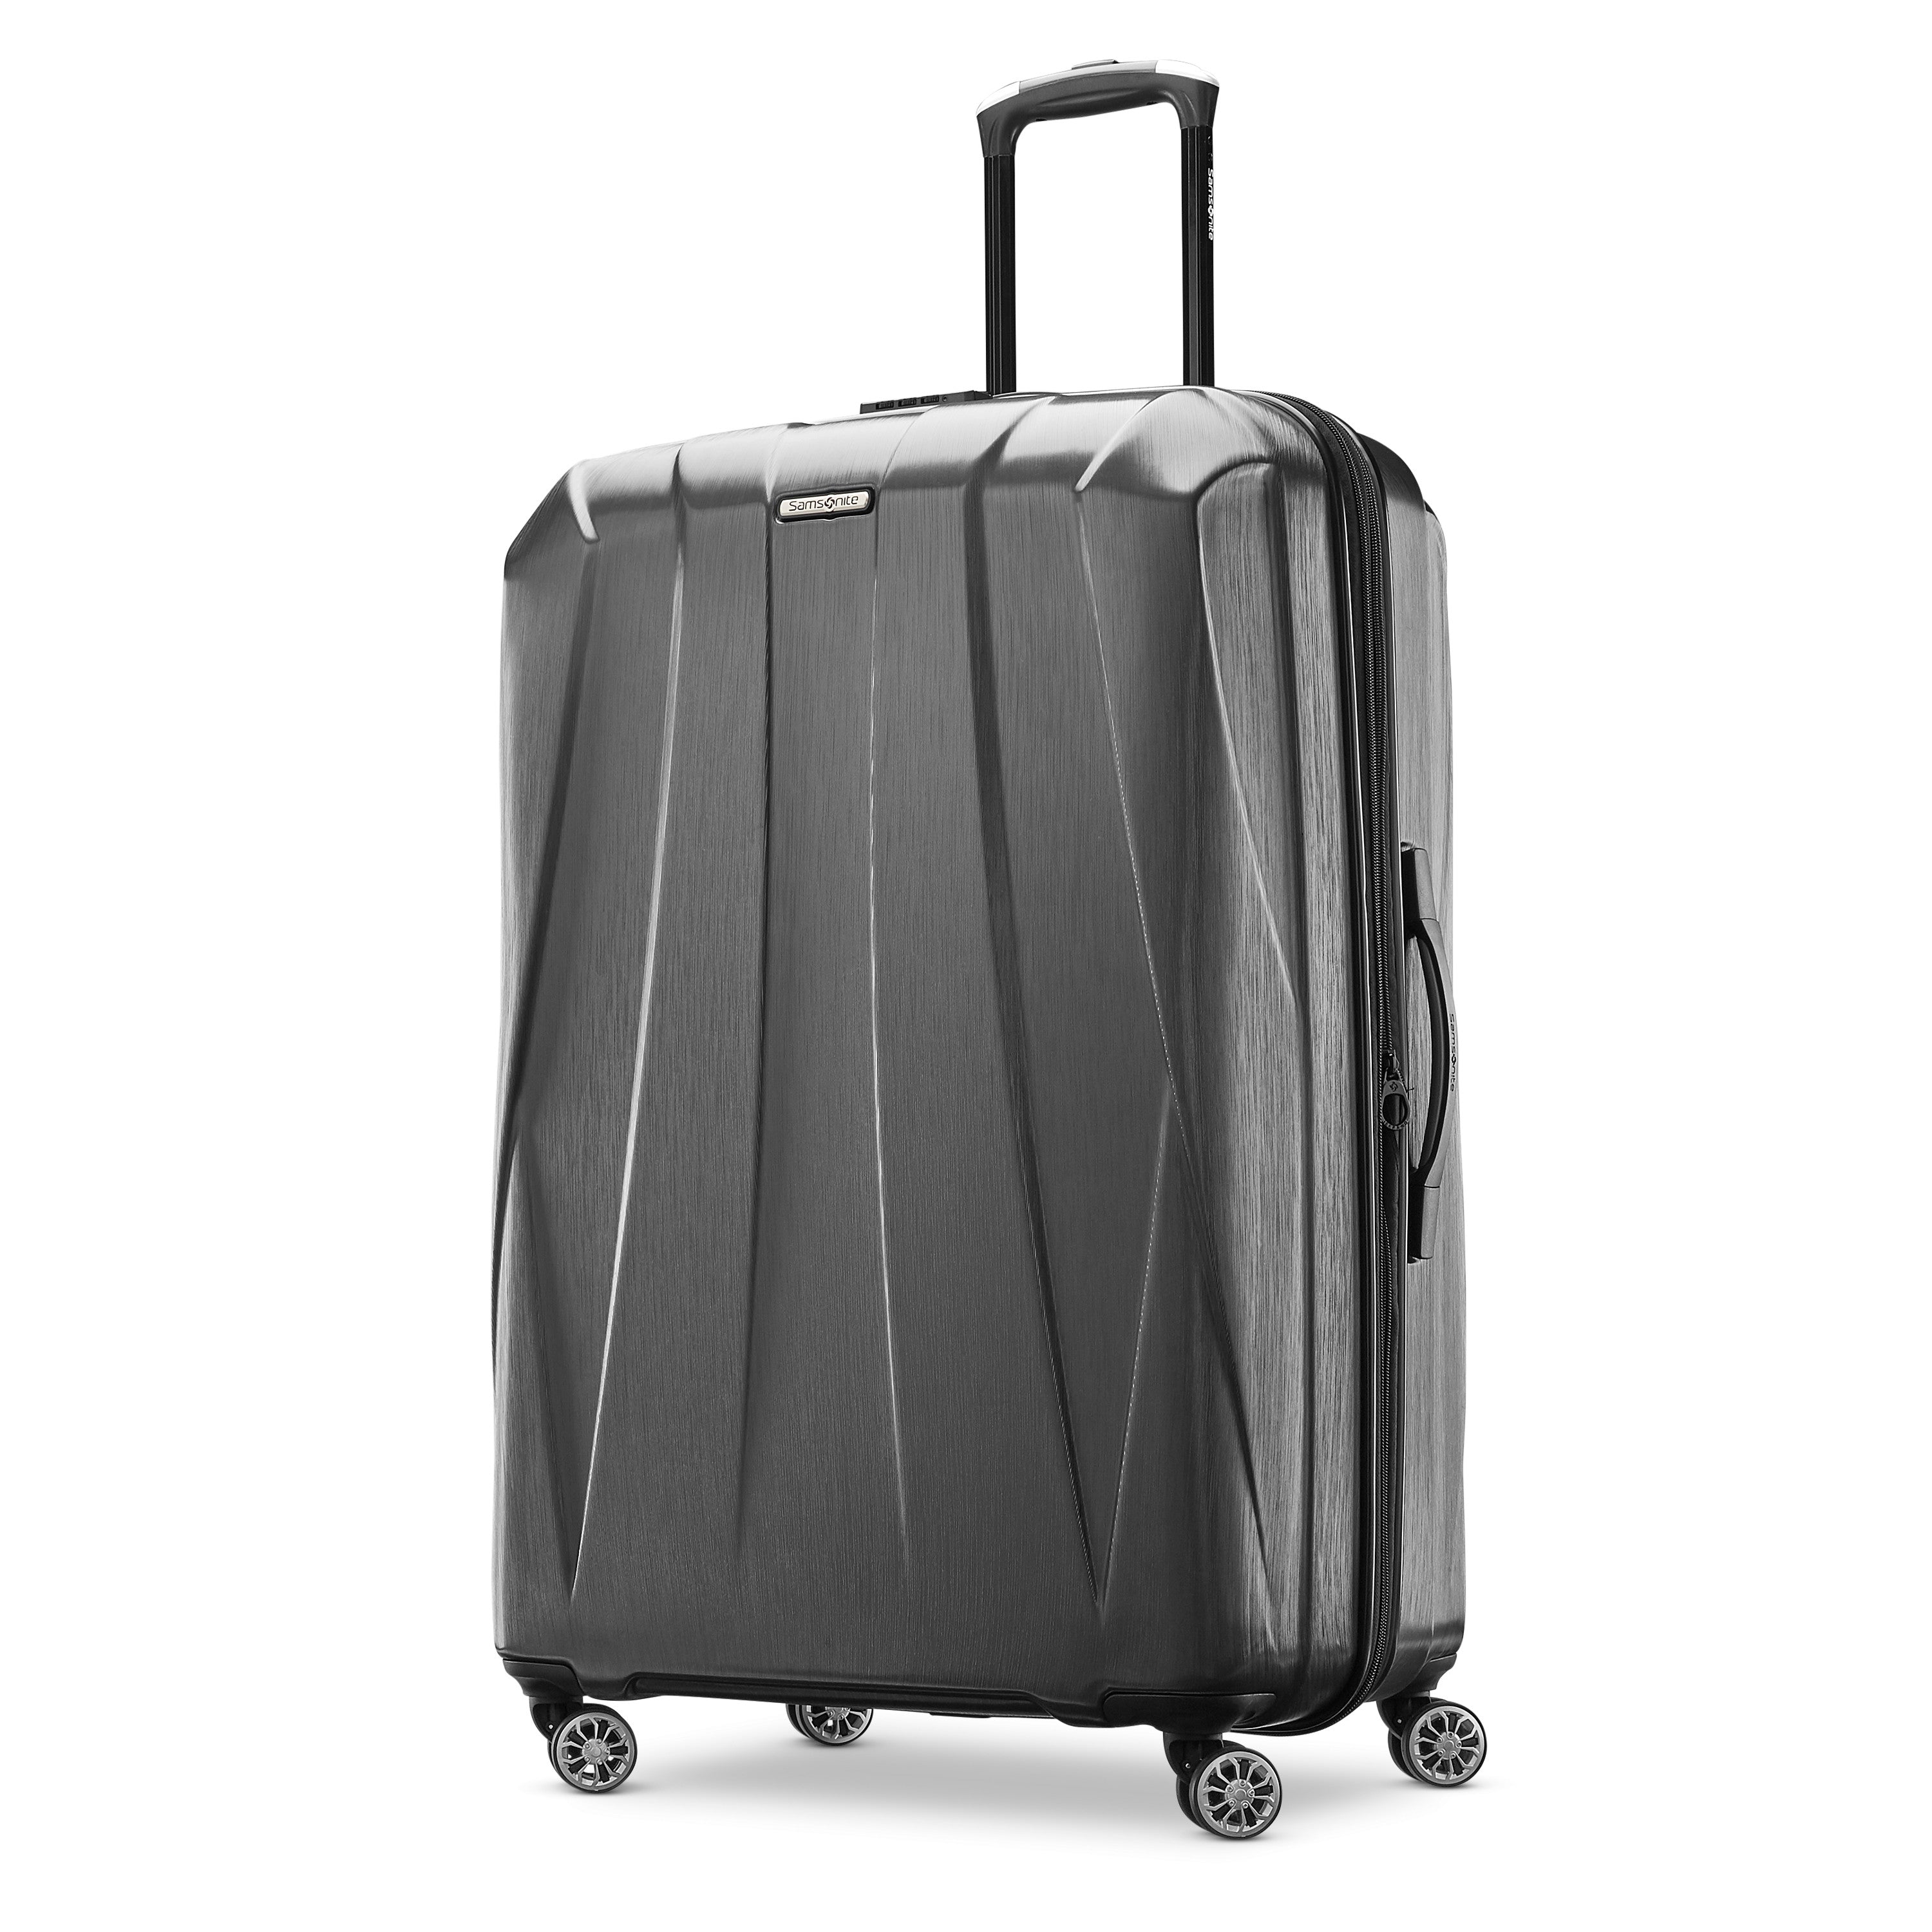 stopverf entiteit Bestrating Samsonite Centric 2 Expandable Hardside Carry On Luggage with Dual Spinner  Wheels – Luggage Online